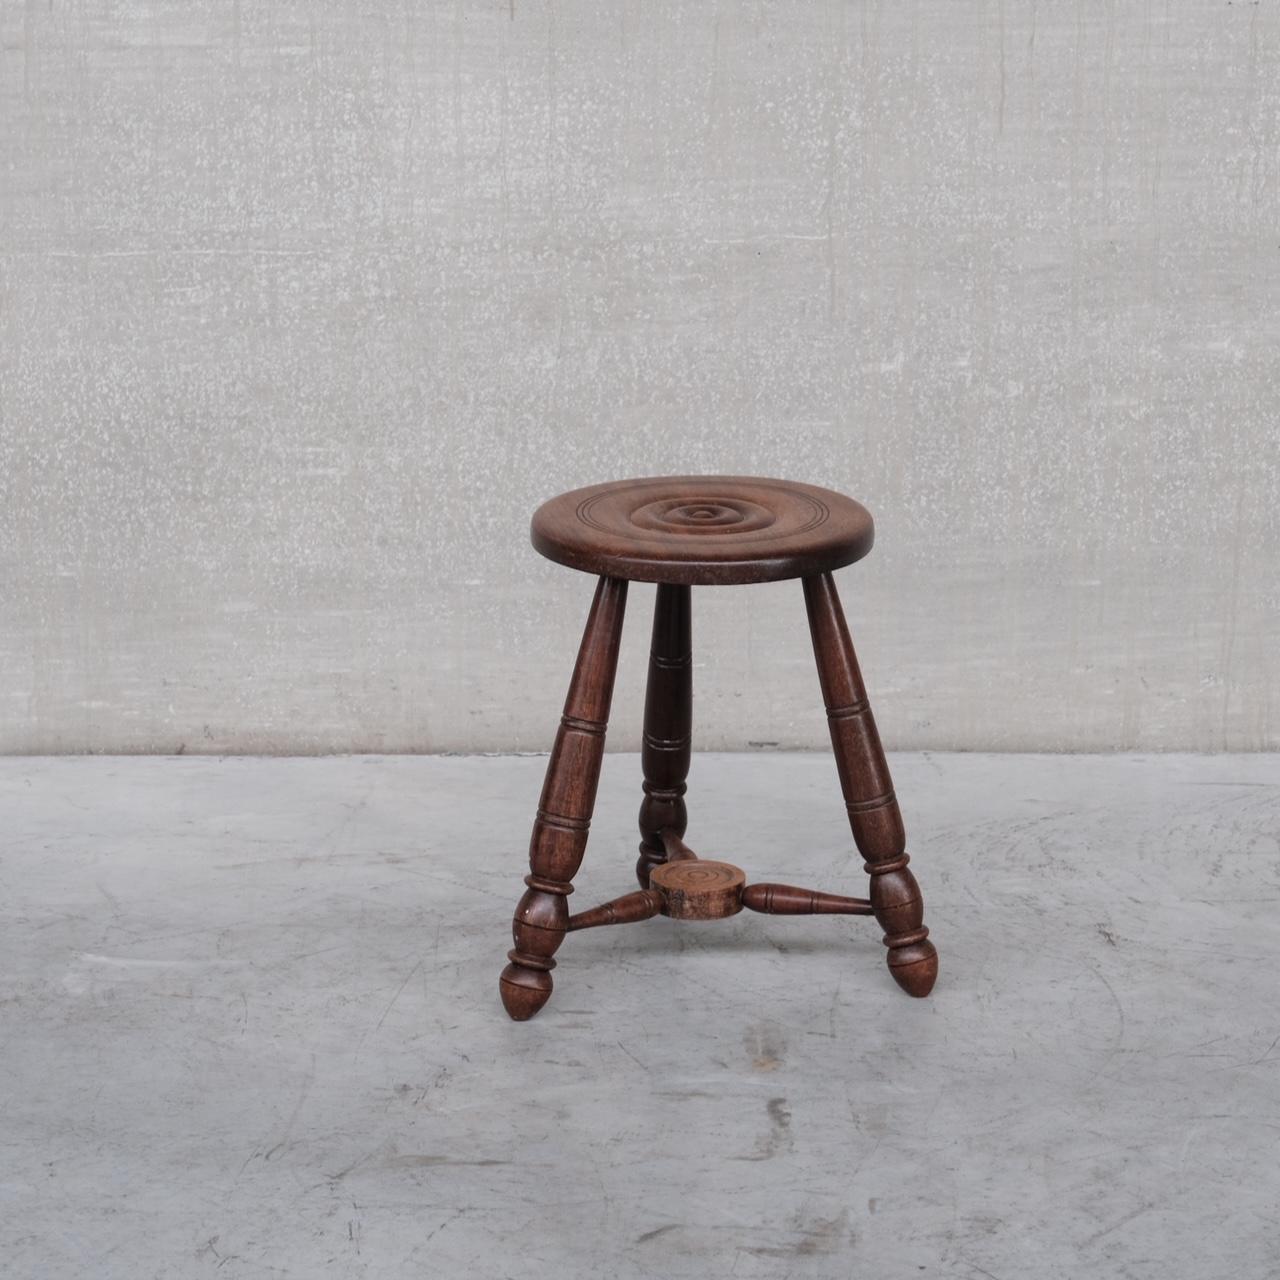 A well formed side table or stool. 

France, c1950s. 

Solid turned oak, in the manner of Charles Dudouyt. 

Late art deco towards mid-century. 

Good condition, some scuffs and wear commensurate with age. 

Location: Belgium Gallery.